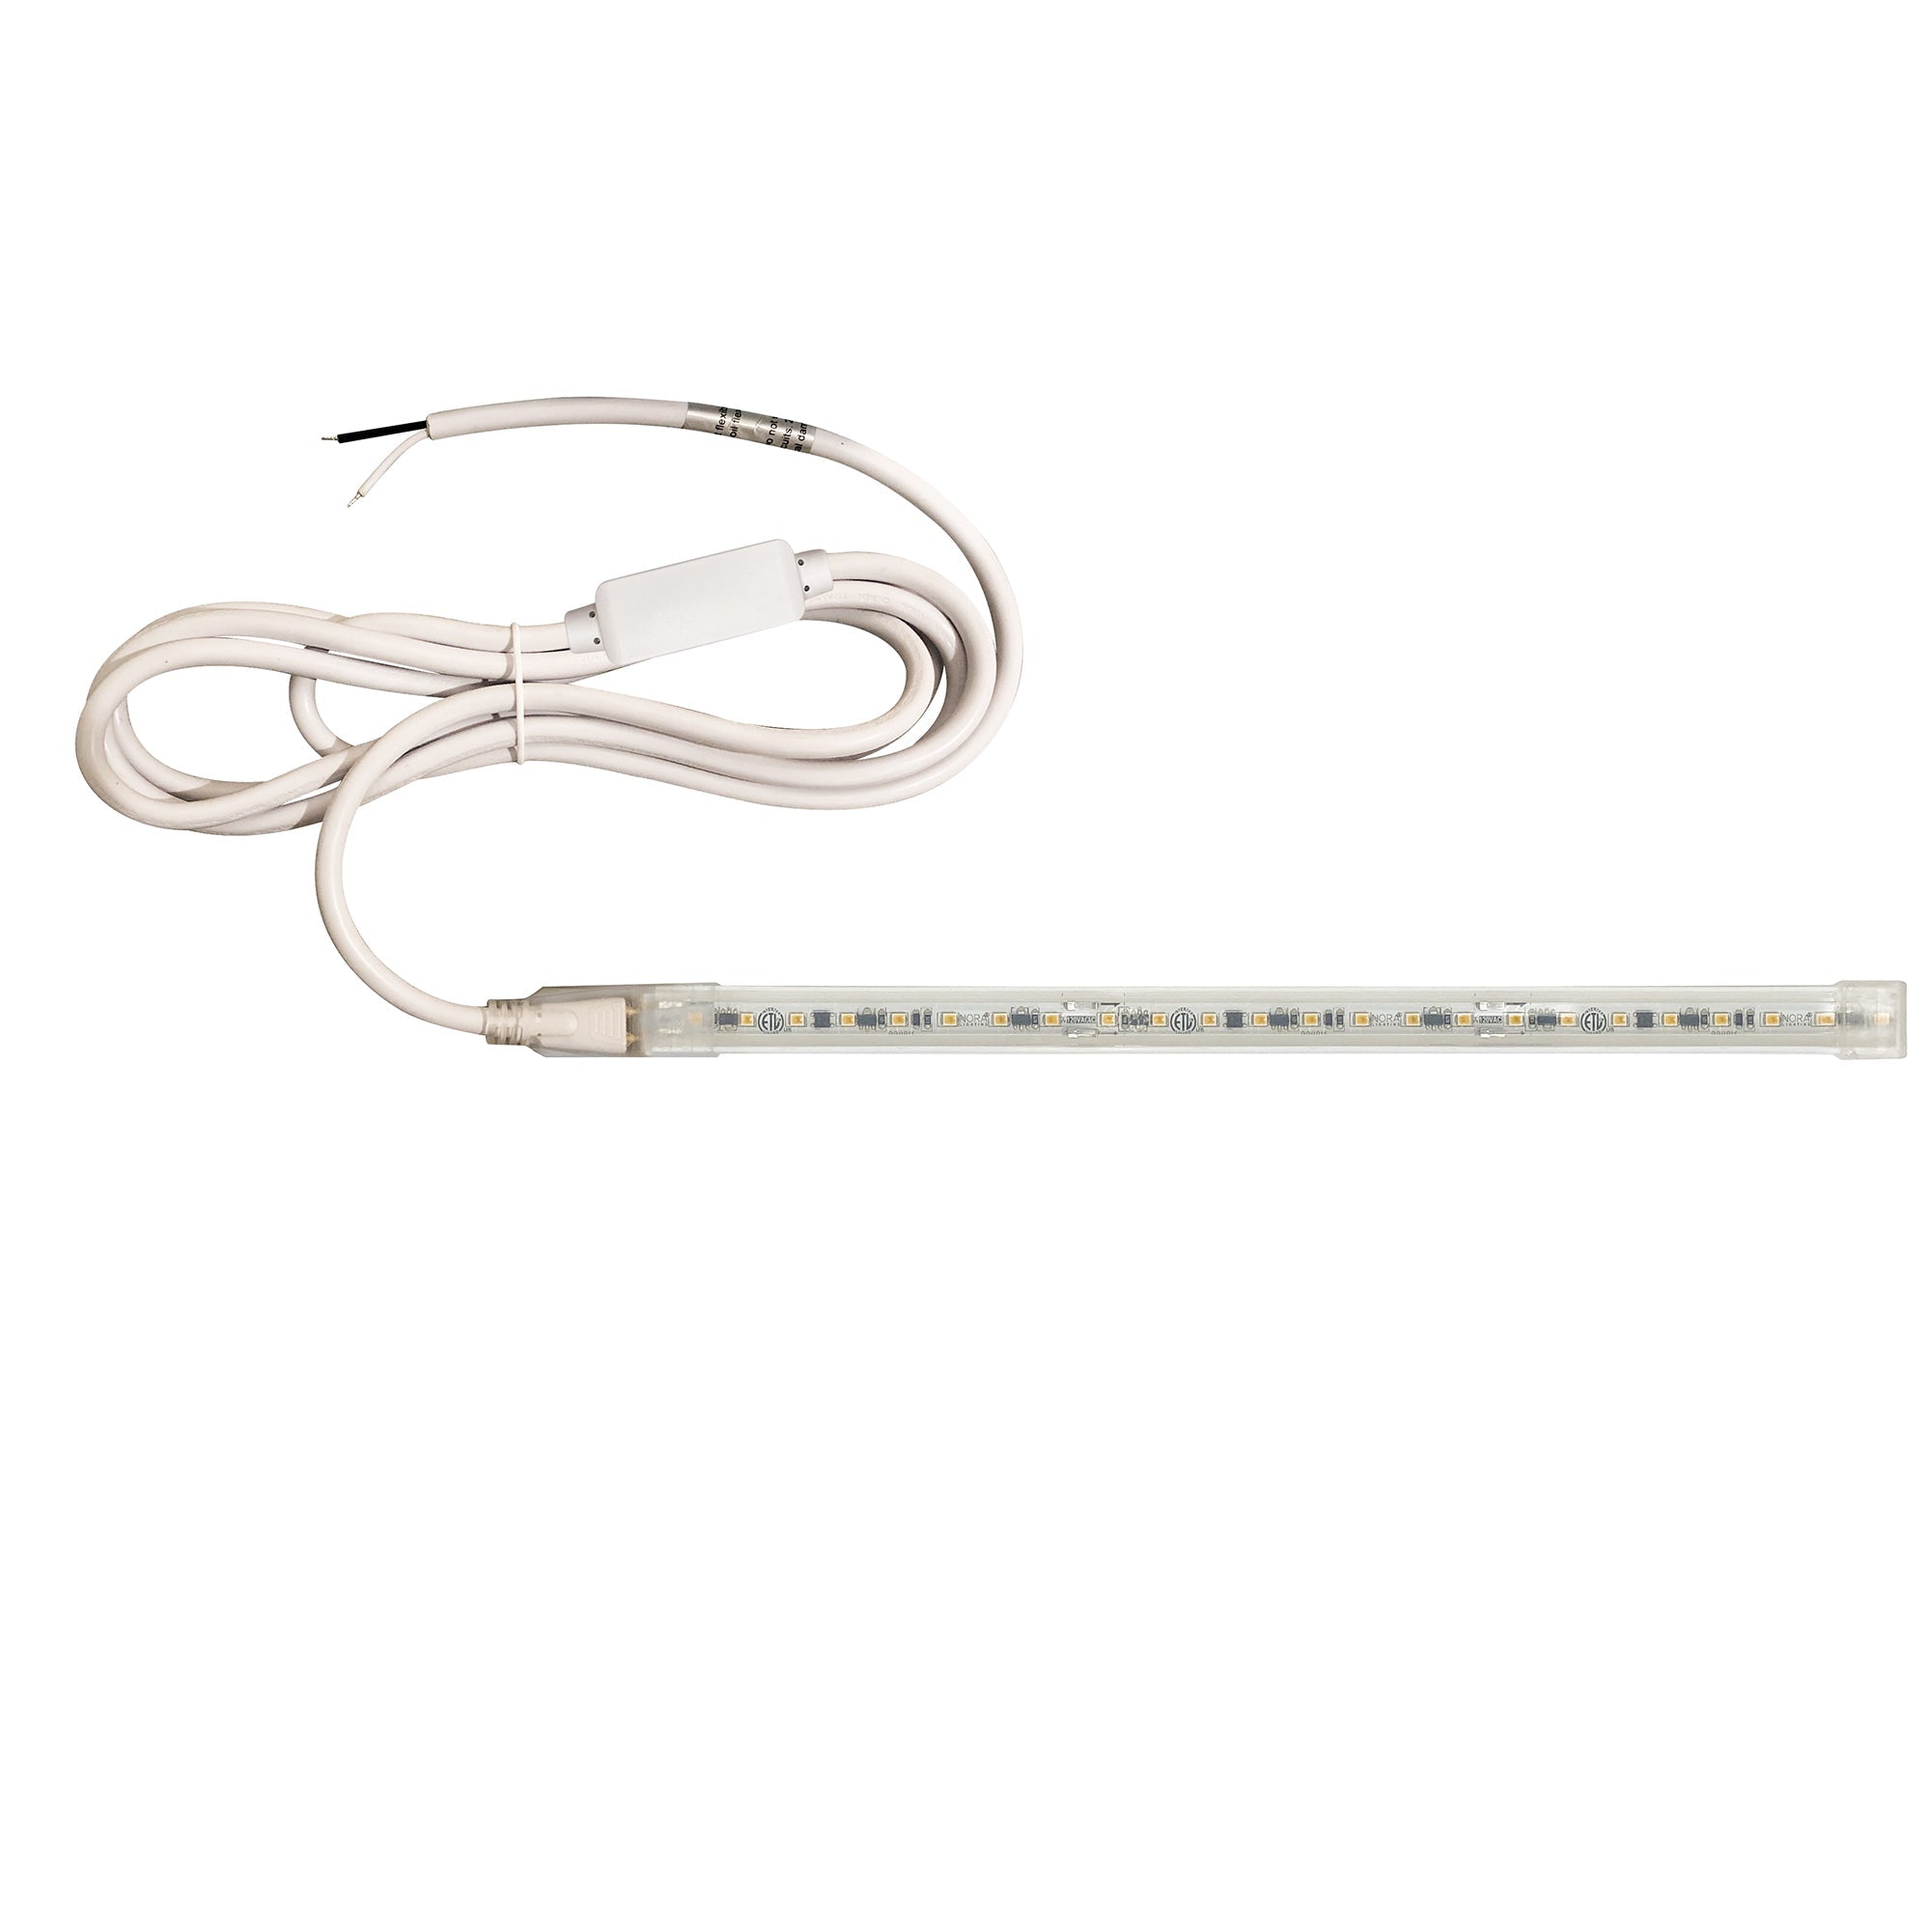 Nora Lighting NUTP13-W49-4-12-930/HWSP - Accent / Undercabinet - Custom Cut 49-ft, 4-in 120V Continuous LED Tape Light, 330lm / 3.6W per foot, 3000K, w/ Mounting Clips and 8' Hardwired Power Cord w/ Surge Protector